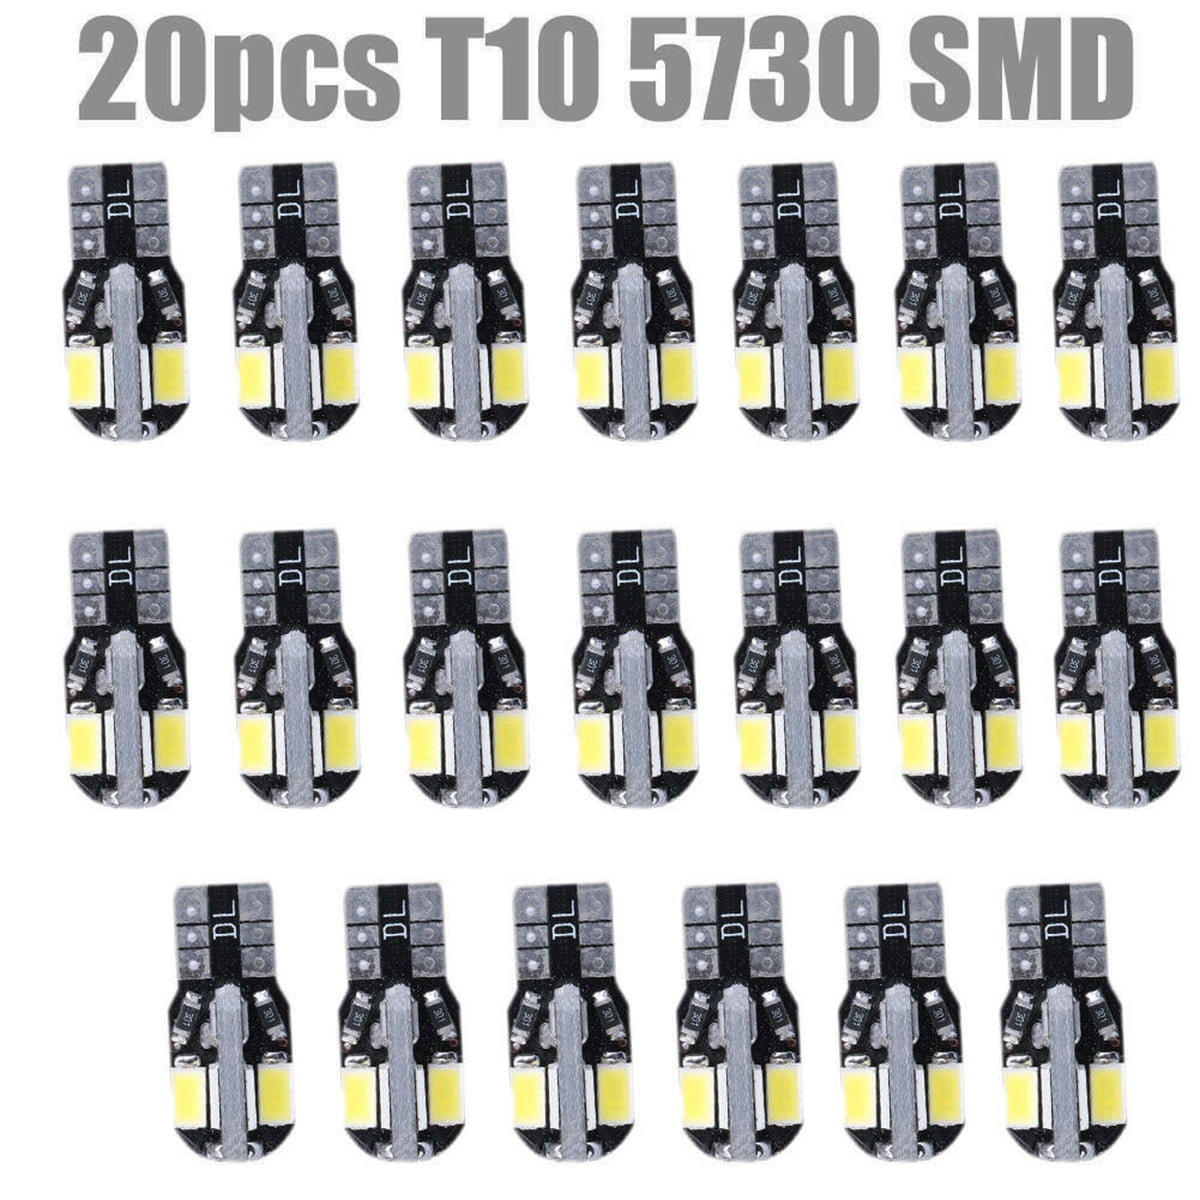 194/168 921 W5W 7014 10-SMD LED Interior Lights Bulb for Car Replacement Lights Trunk/License Plate Side Marker Light EverBright 20-Pack Amber T10